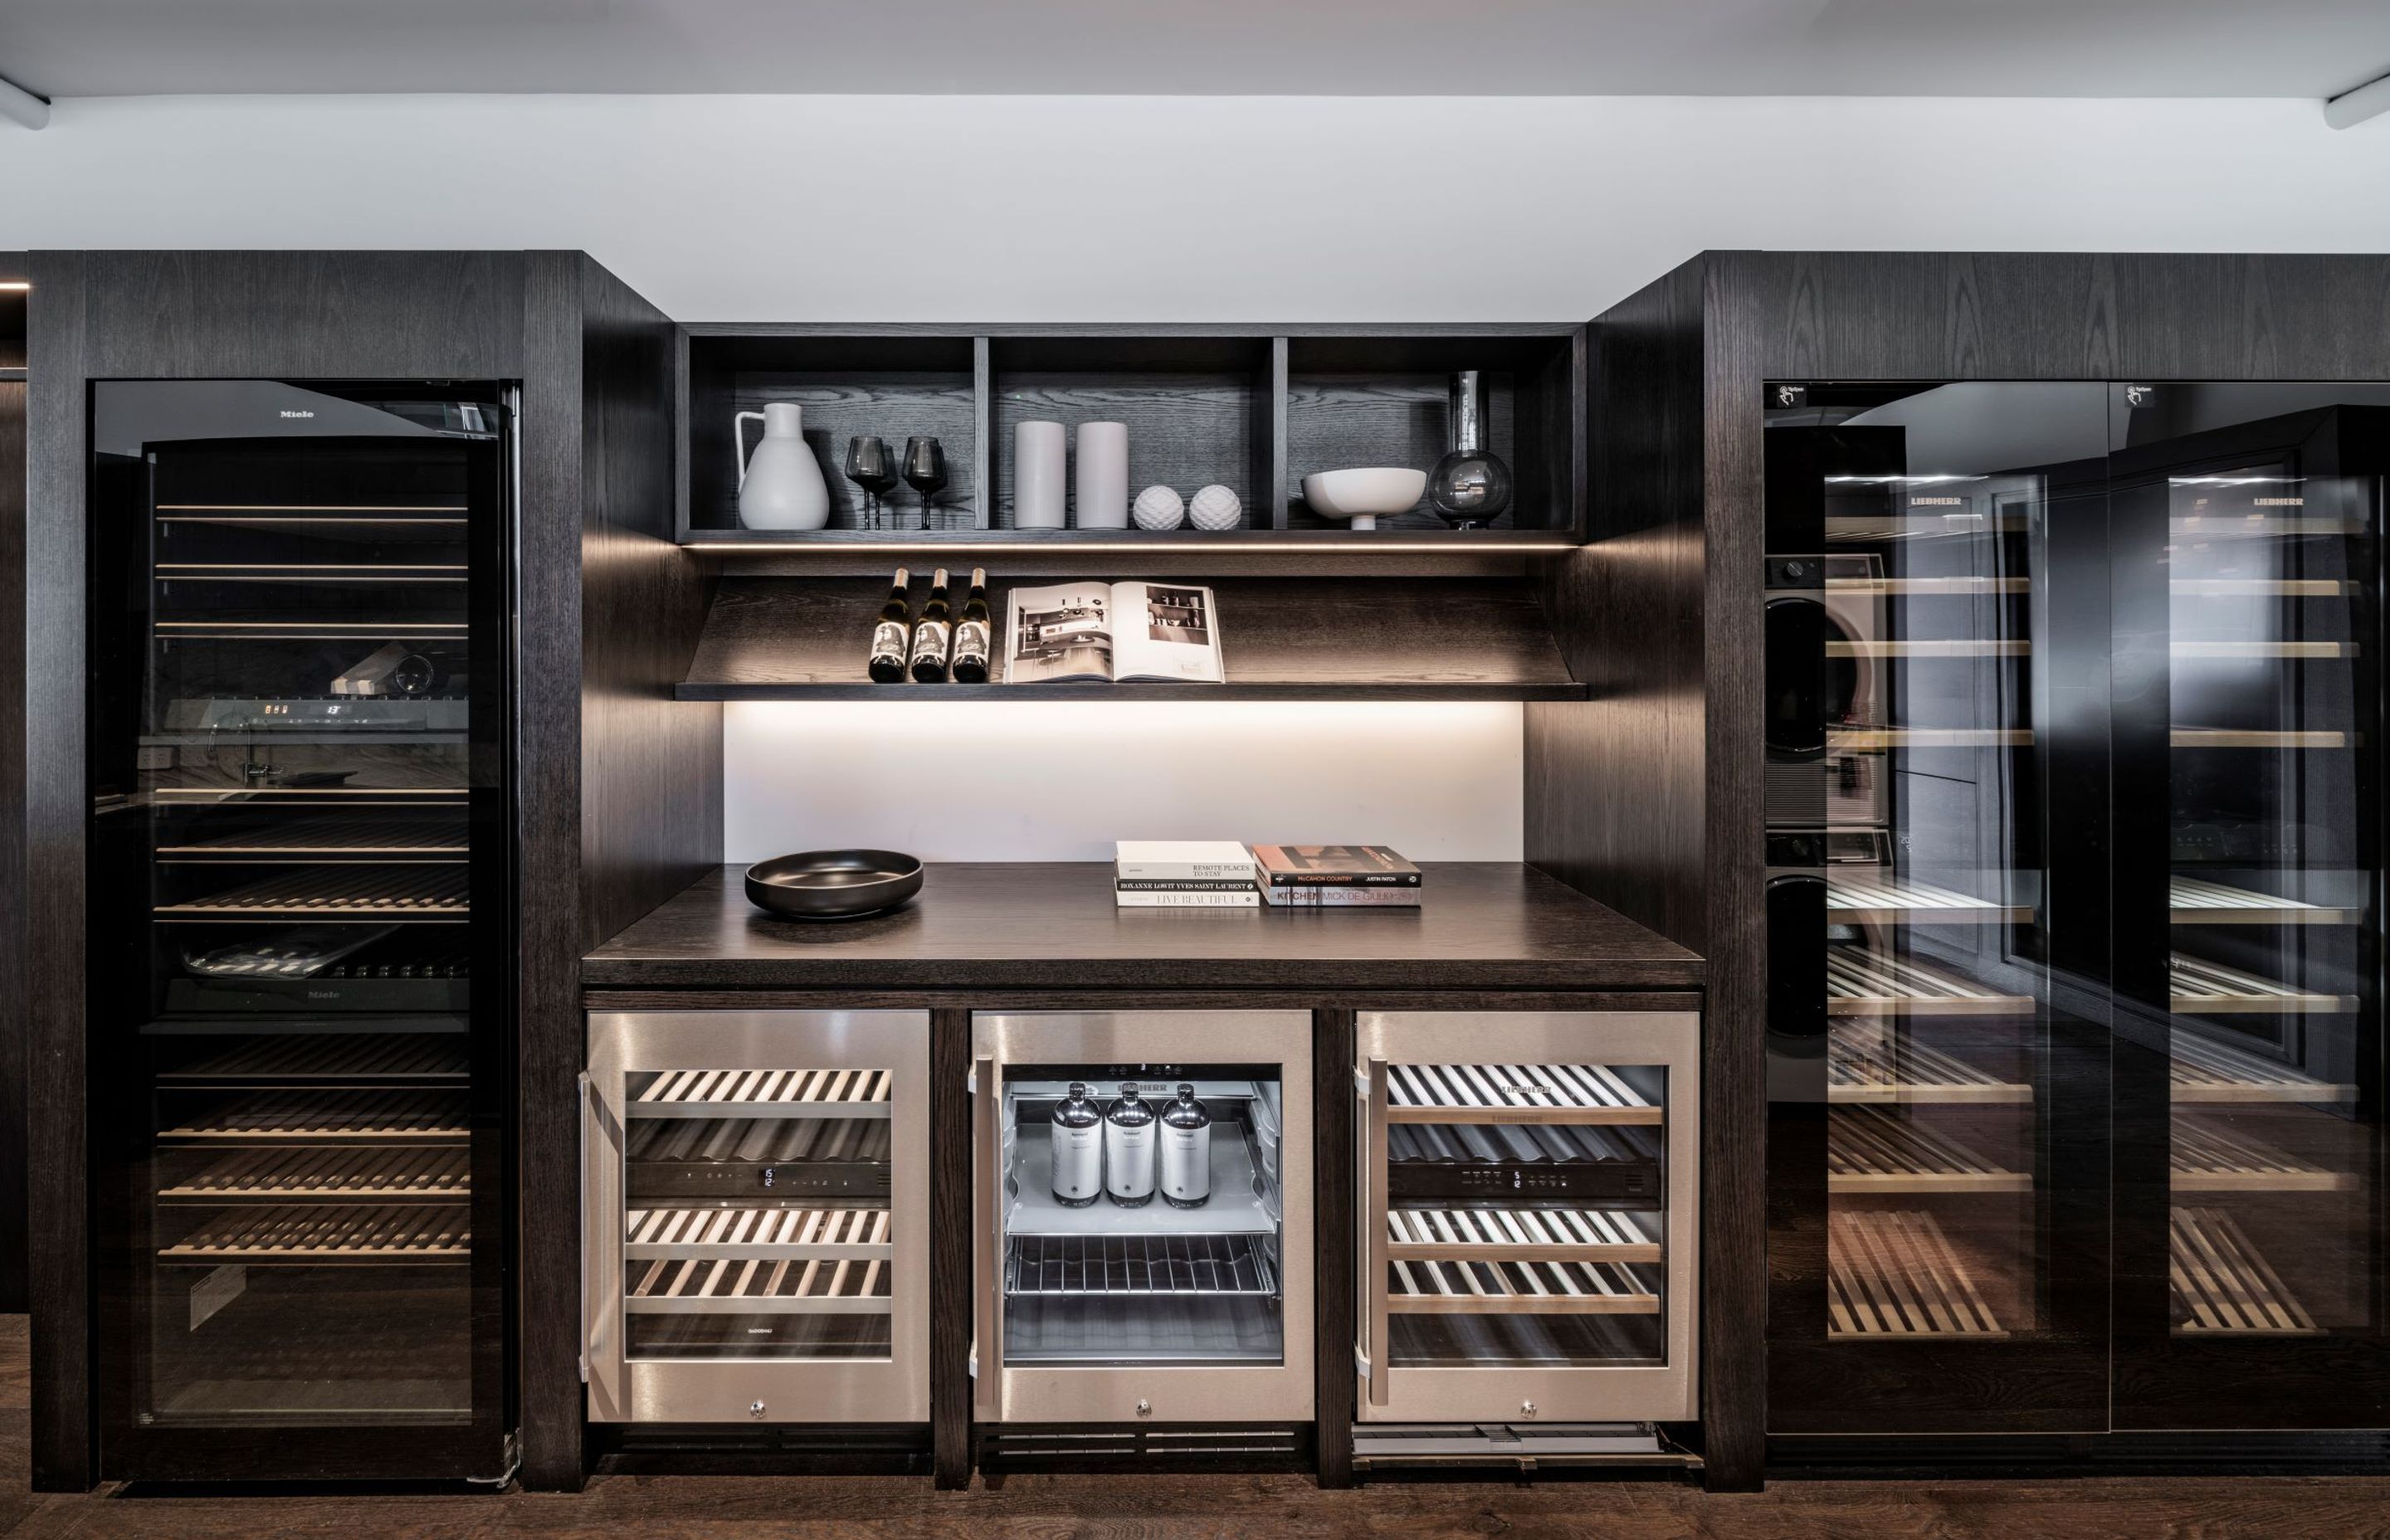 Details by Design created a warm and enticing area for the wine cabinets and under bench fridges by Miele, Liebherr and Gaggenau.